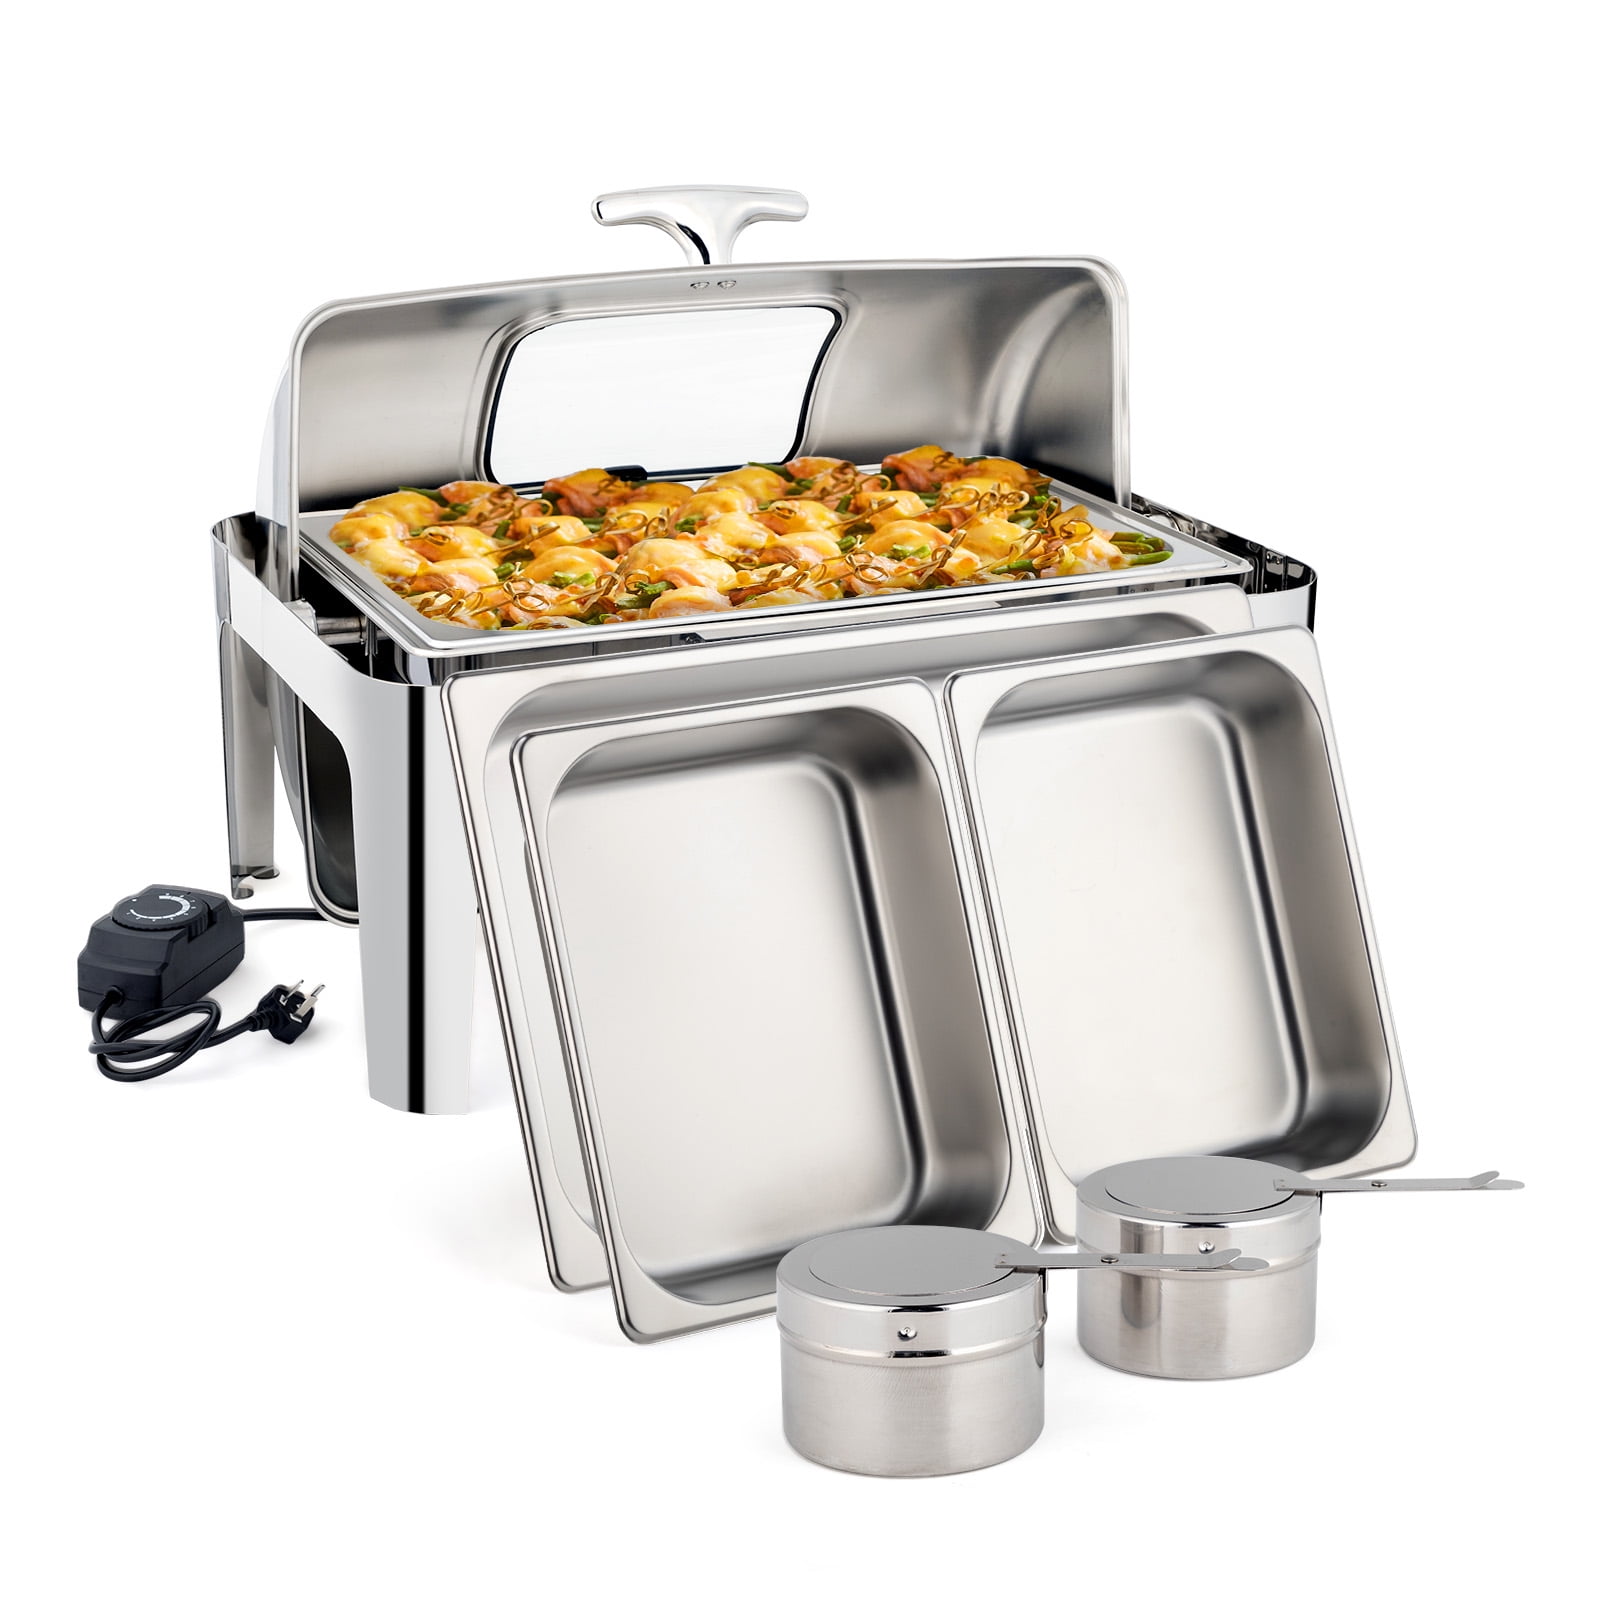 KFJZGZZ Food Warmers for Parties, Electric Chafing Dish Buffet Set with  Lids, Stainless Steel Catering Serve Chafer, 9L Commercial Buffet Servers